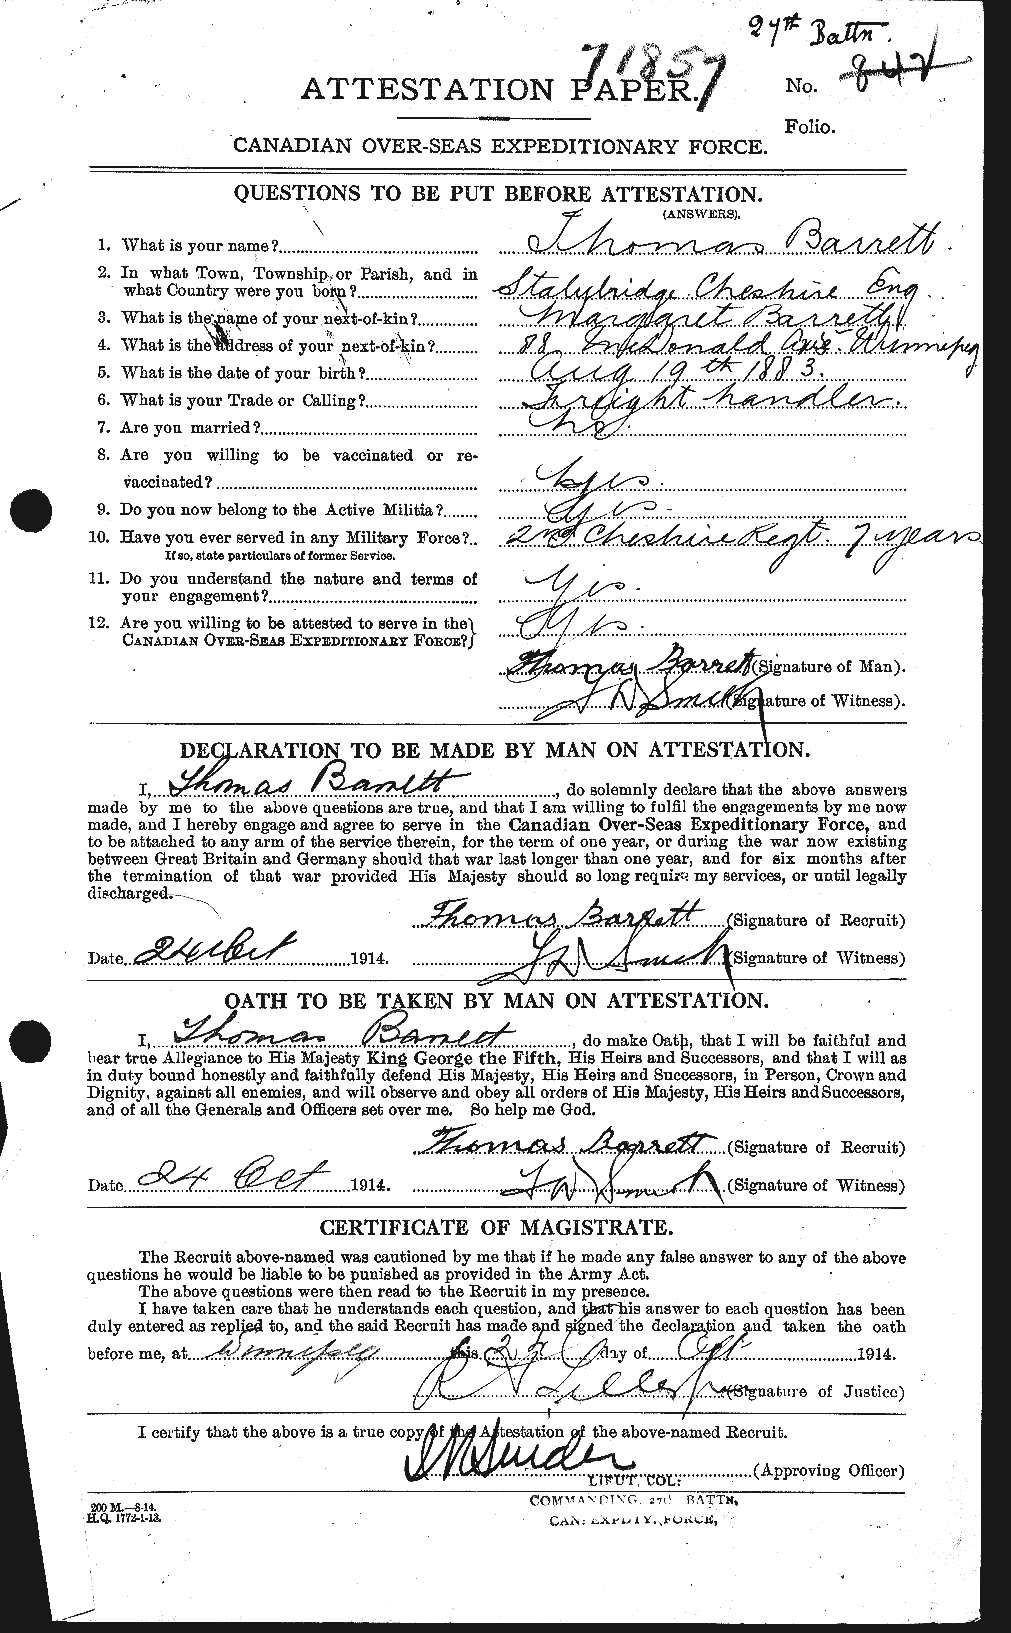 Personnel Records of the First World War - CEF 220171a